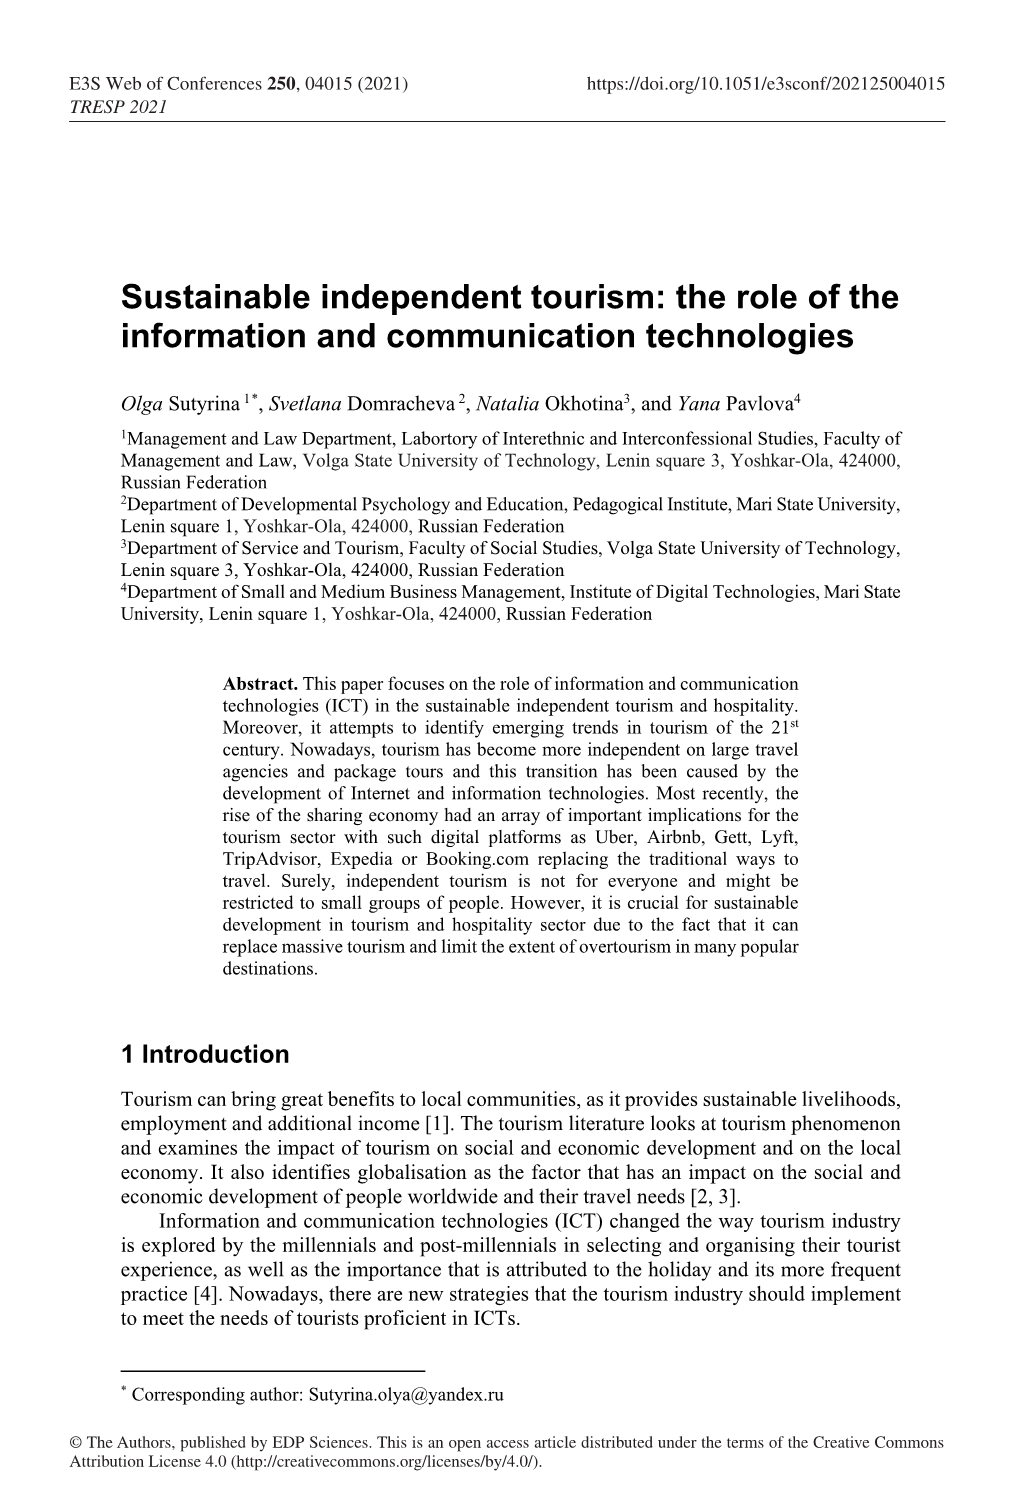 Sustainable Independent Tourism: the Role of the Information and Communication Technologies